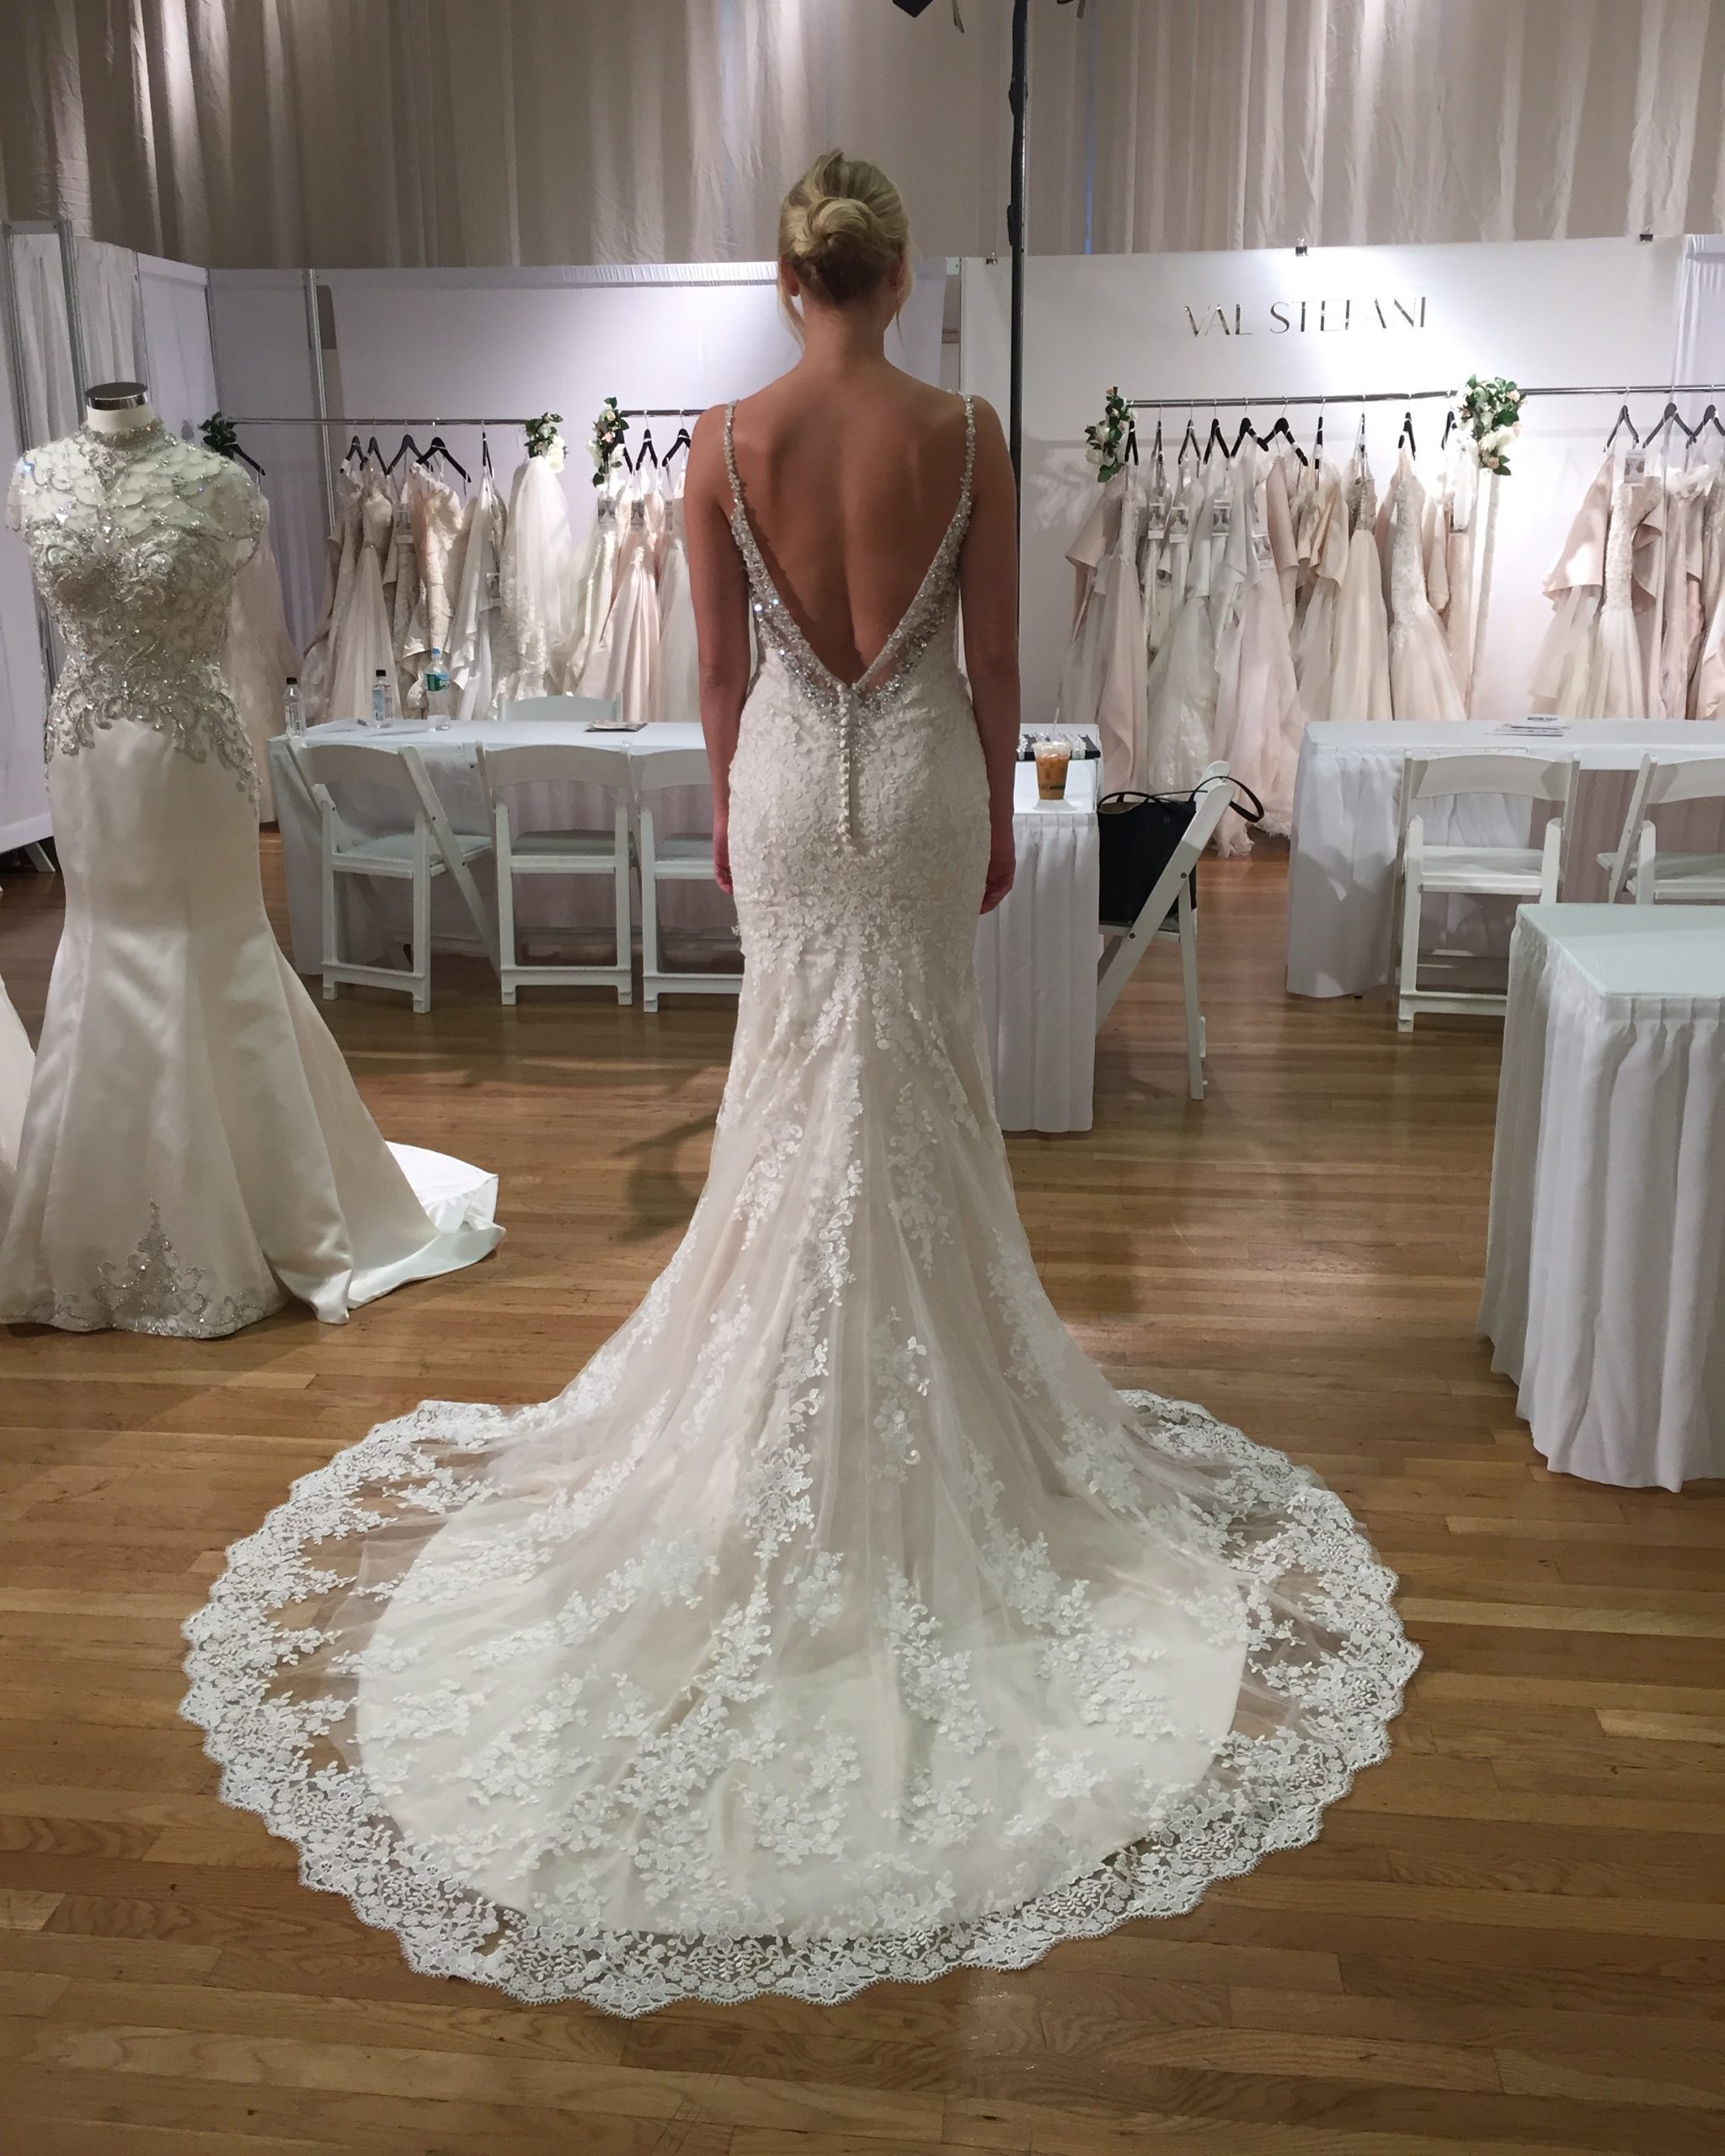 6 Tips For Planning Your First NYC Bridal Fashion Week - Marry Me Tampa Bay